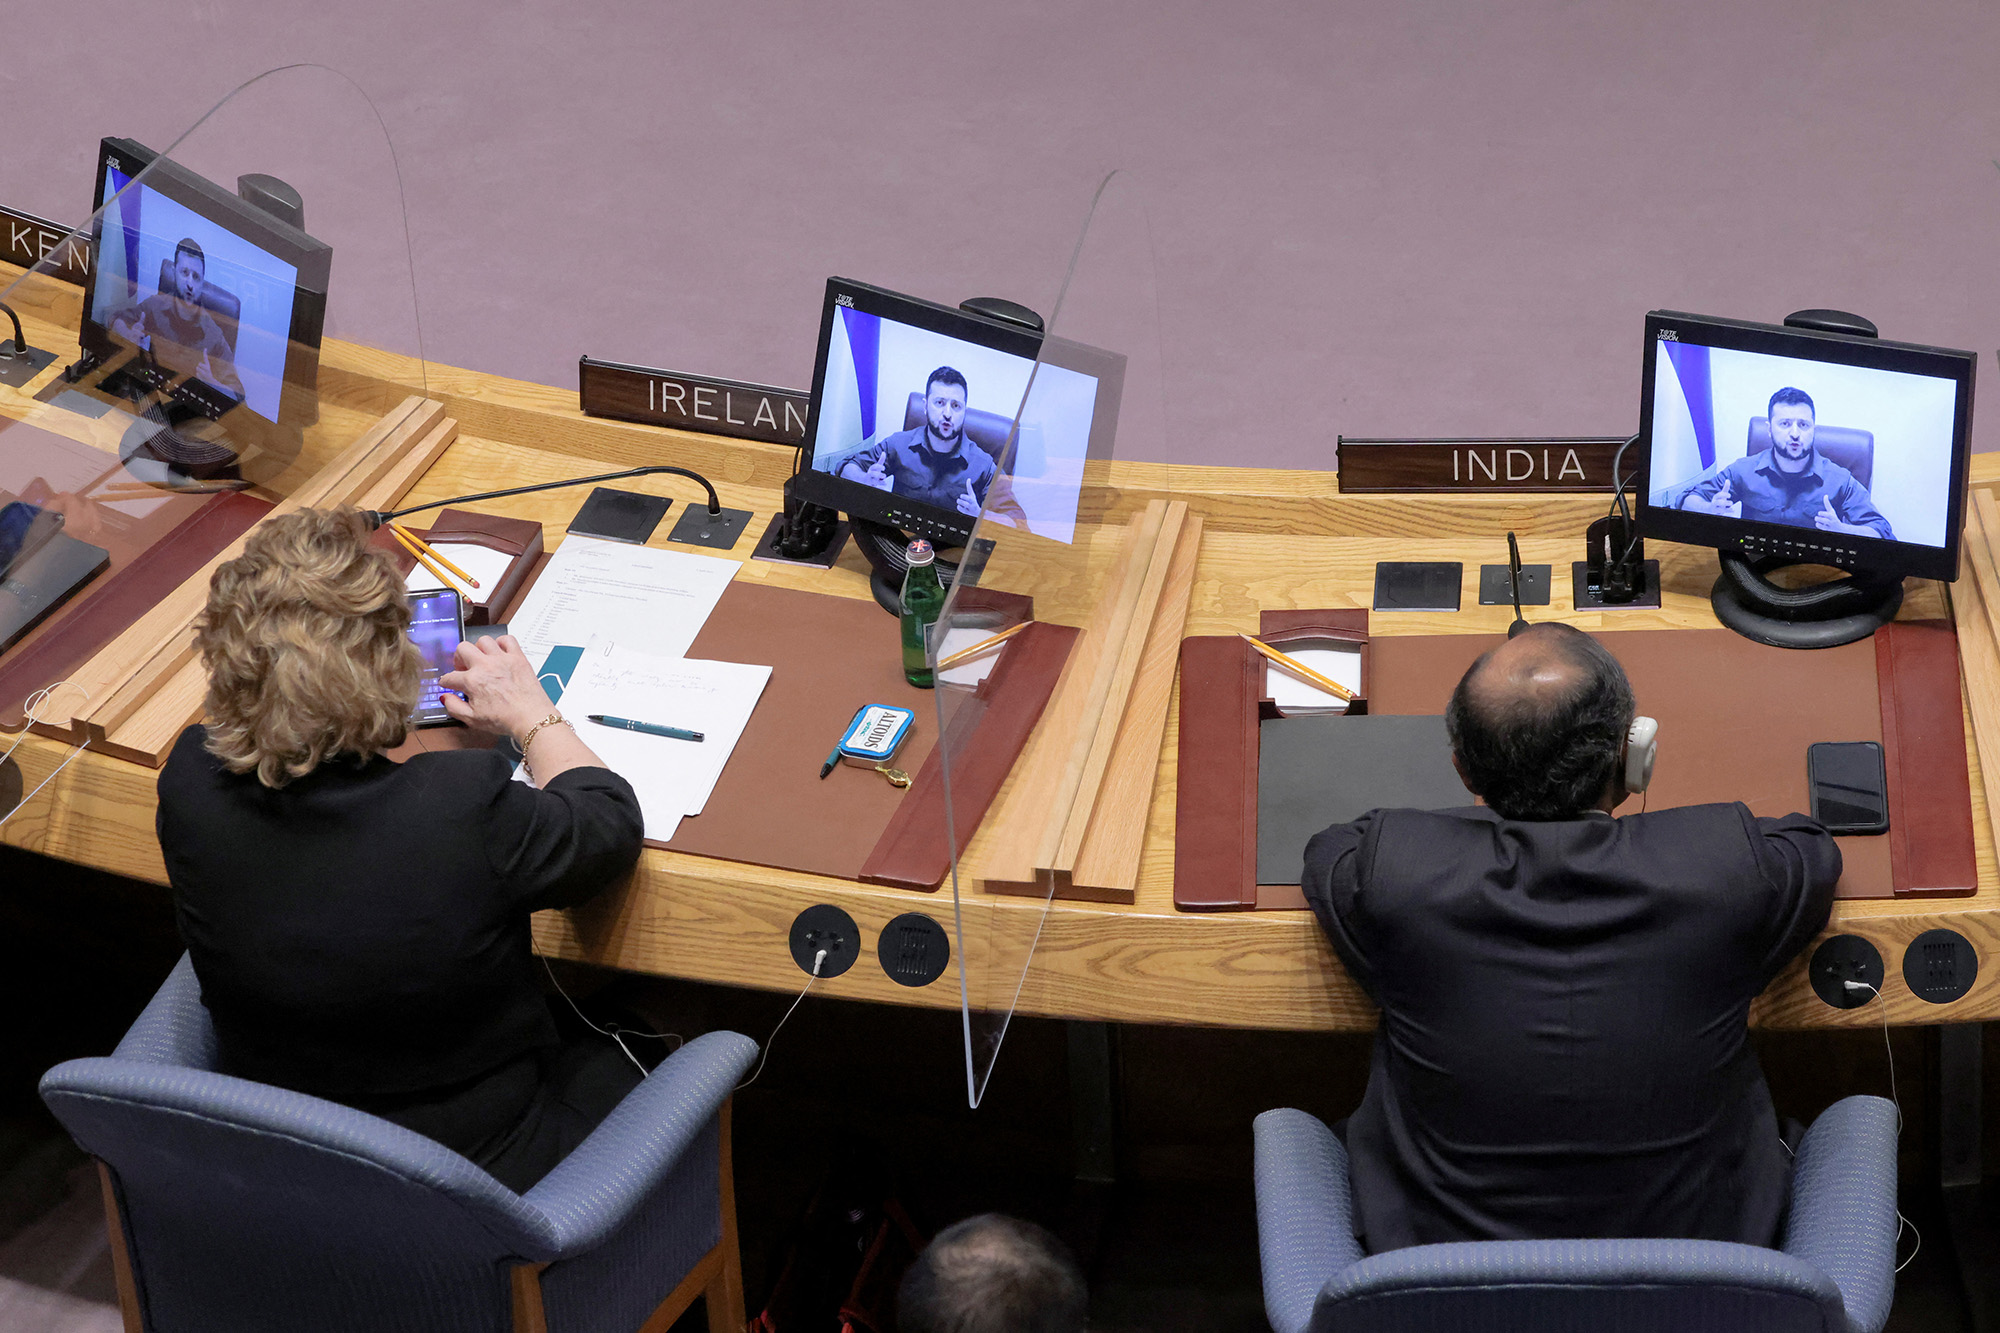 Ukrainian President Volodymyr Zelensky appears on screens as he addresses the United Nations Security Council via video link during a meeting at the United Nations Headquarters in Manhattan, New York City, on  April 5.